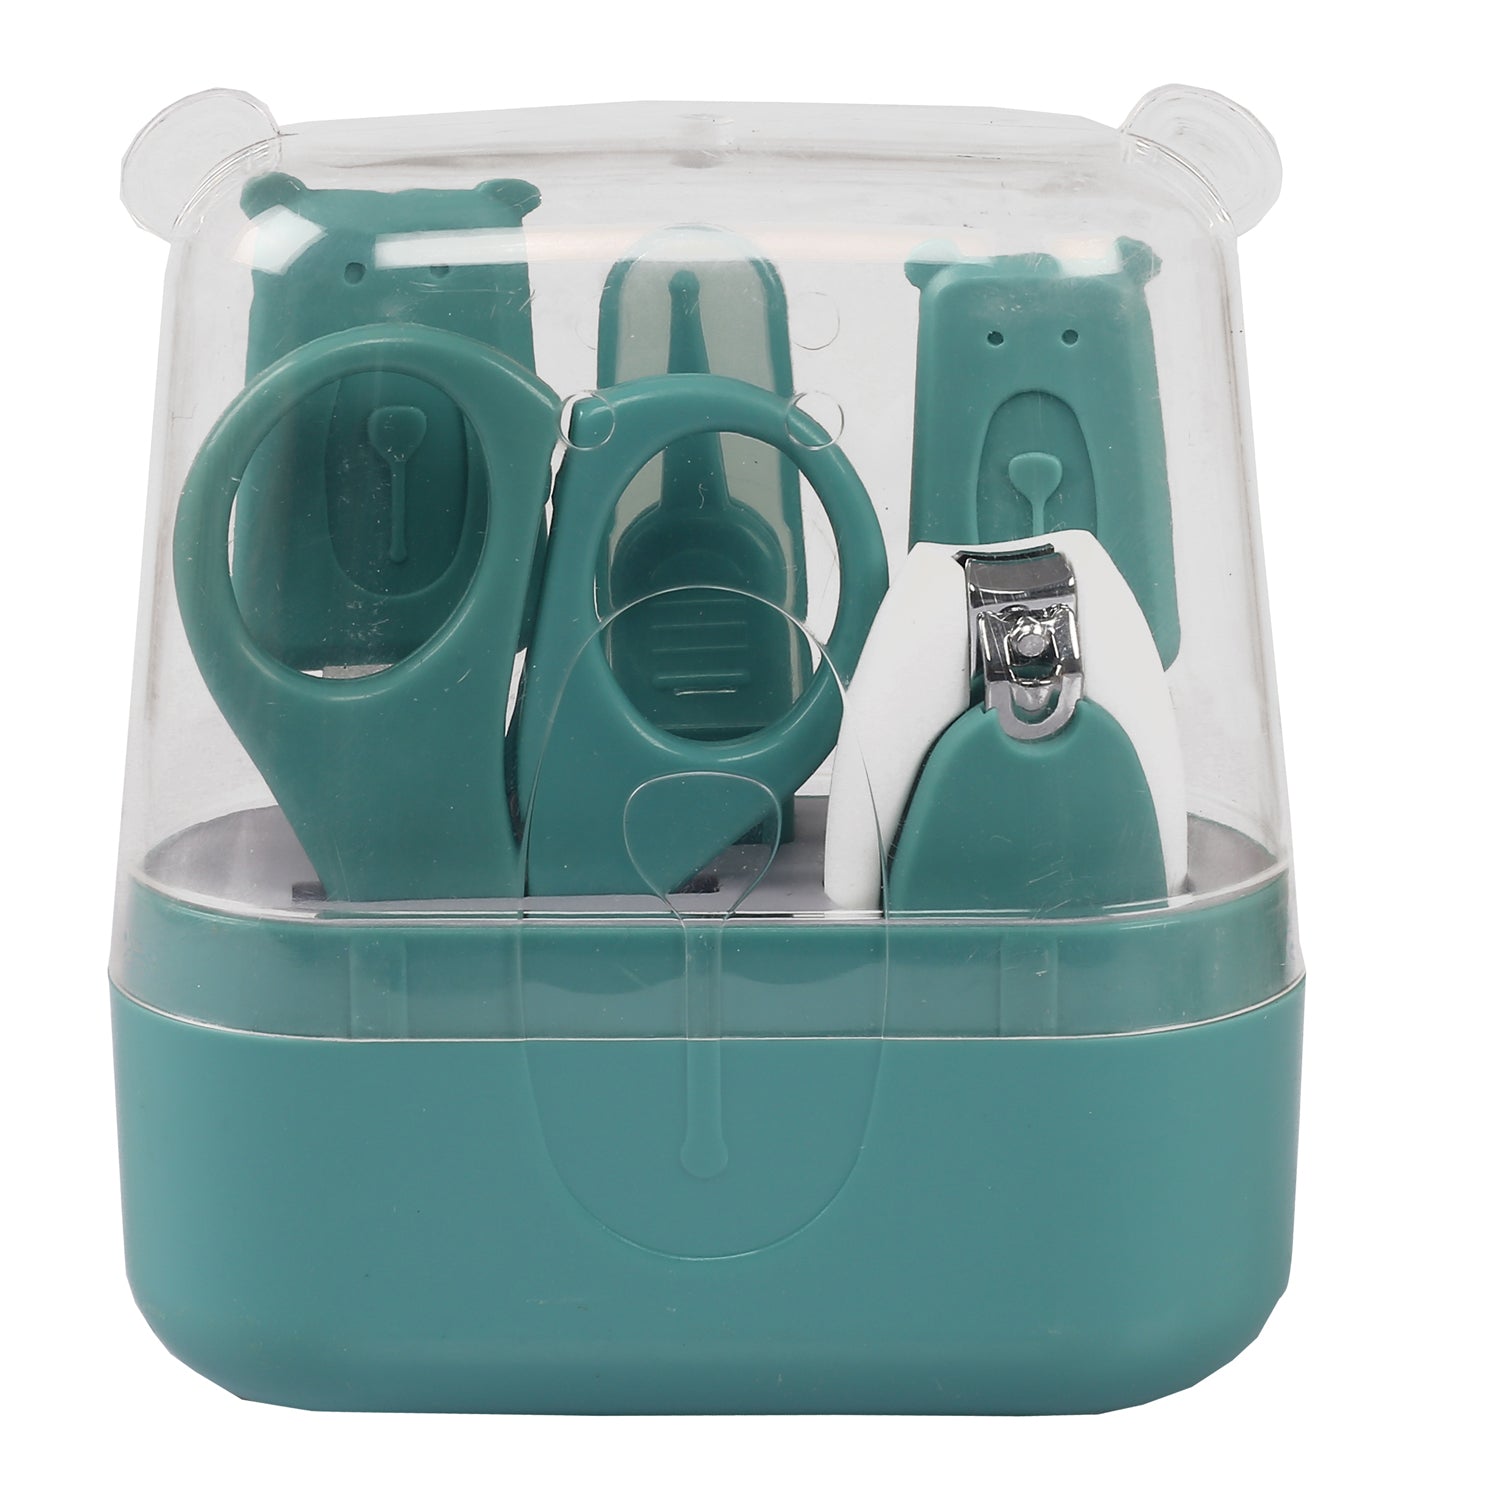 Teal Grooming Kit of 5 Pcs with a Nail Clipper - Baby Moo